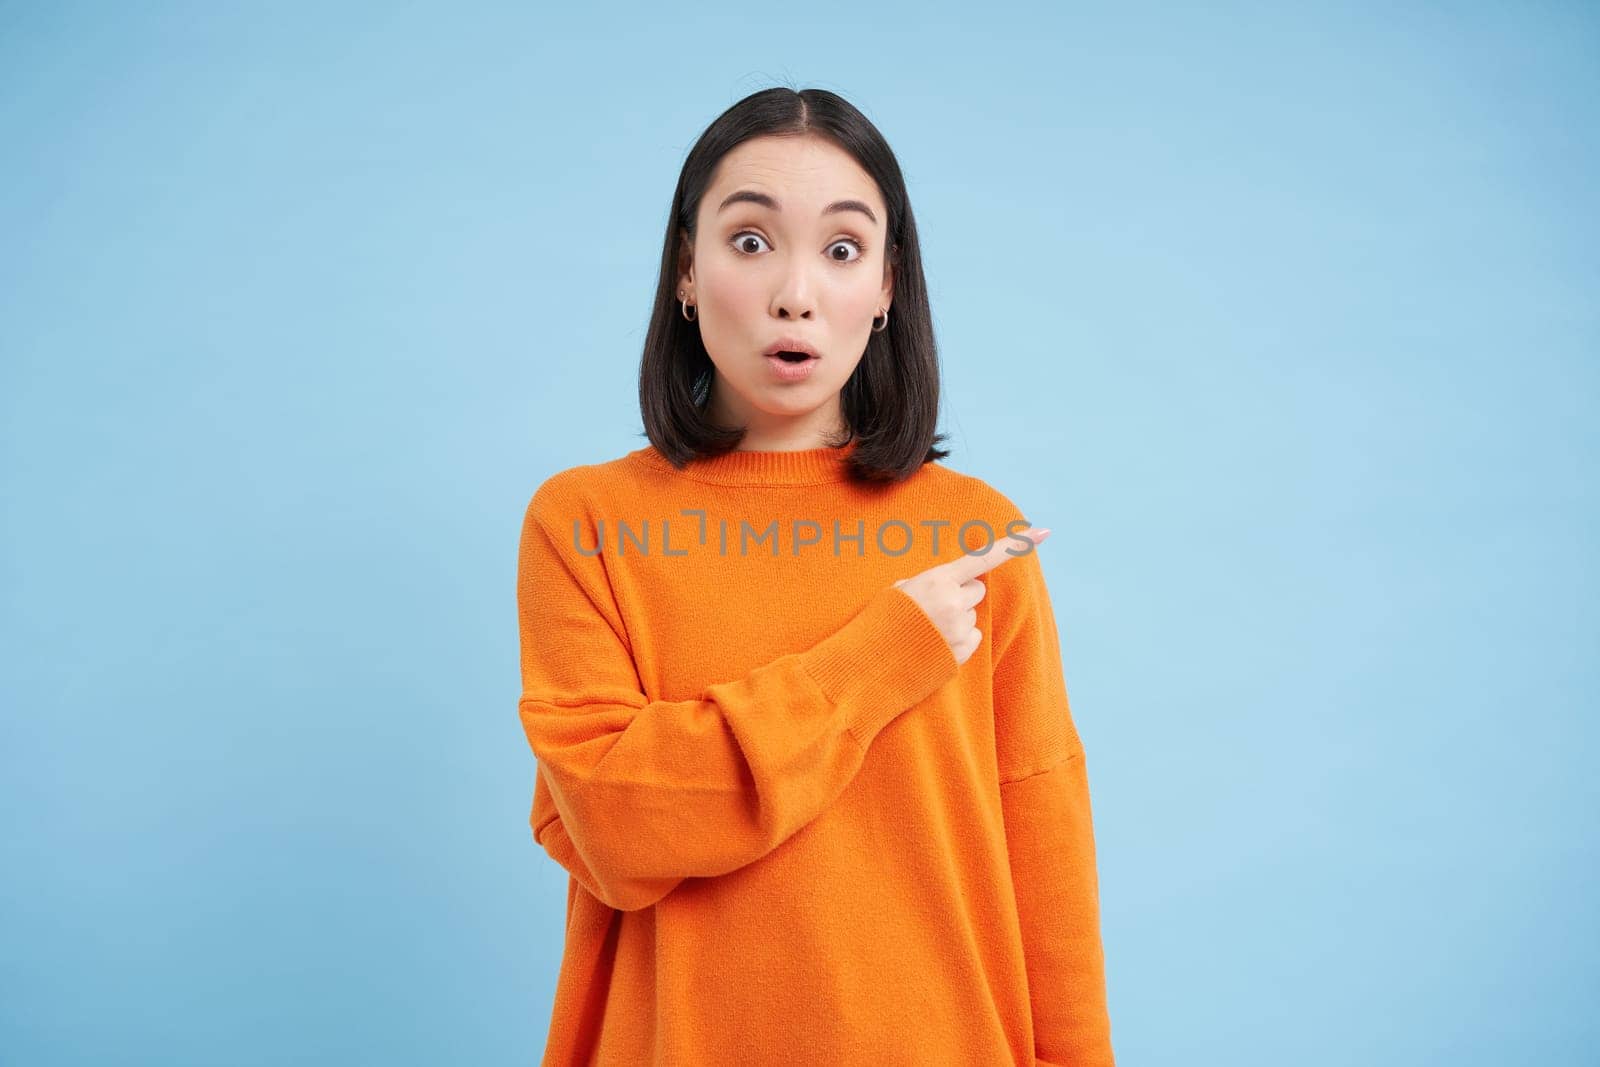 Surprised korean woman, pointing right, showing promo banner with amazed face expression, stands over blue background. Copy space